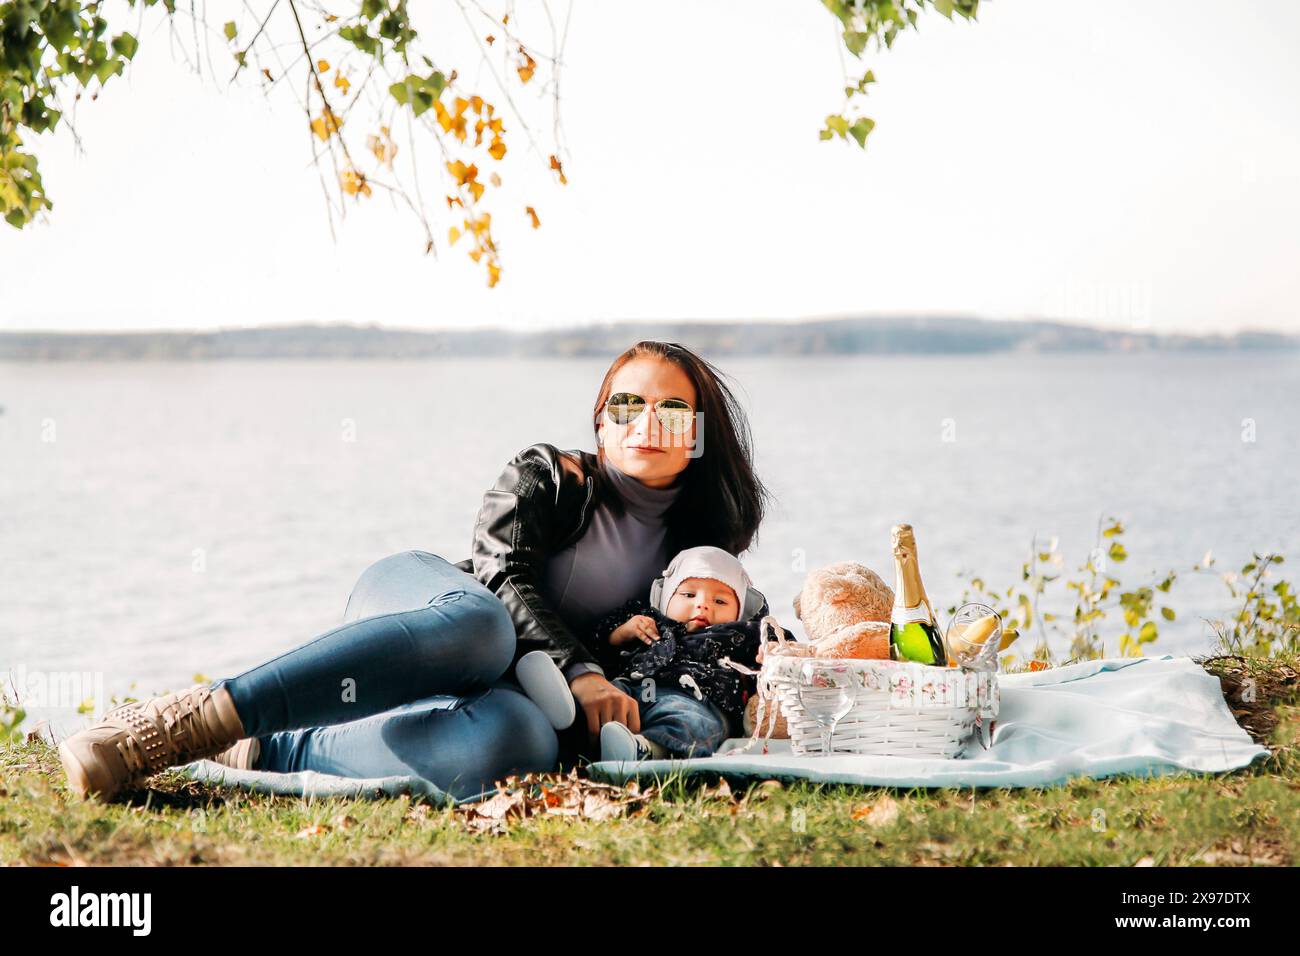 Woman with a baby lying on a blanket by a lake having a picnic, surrounded by autumn leaves Stock Photo